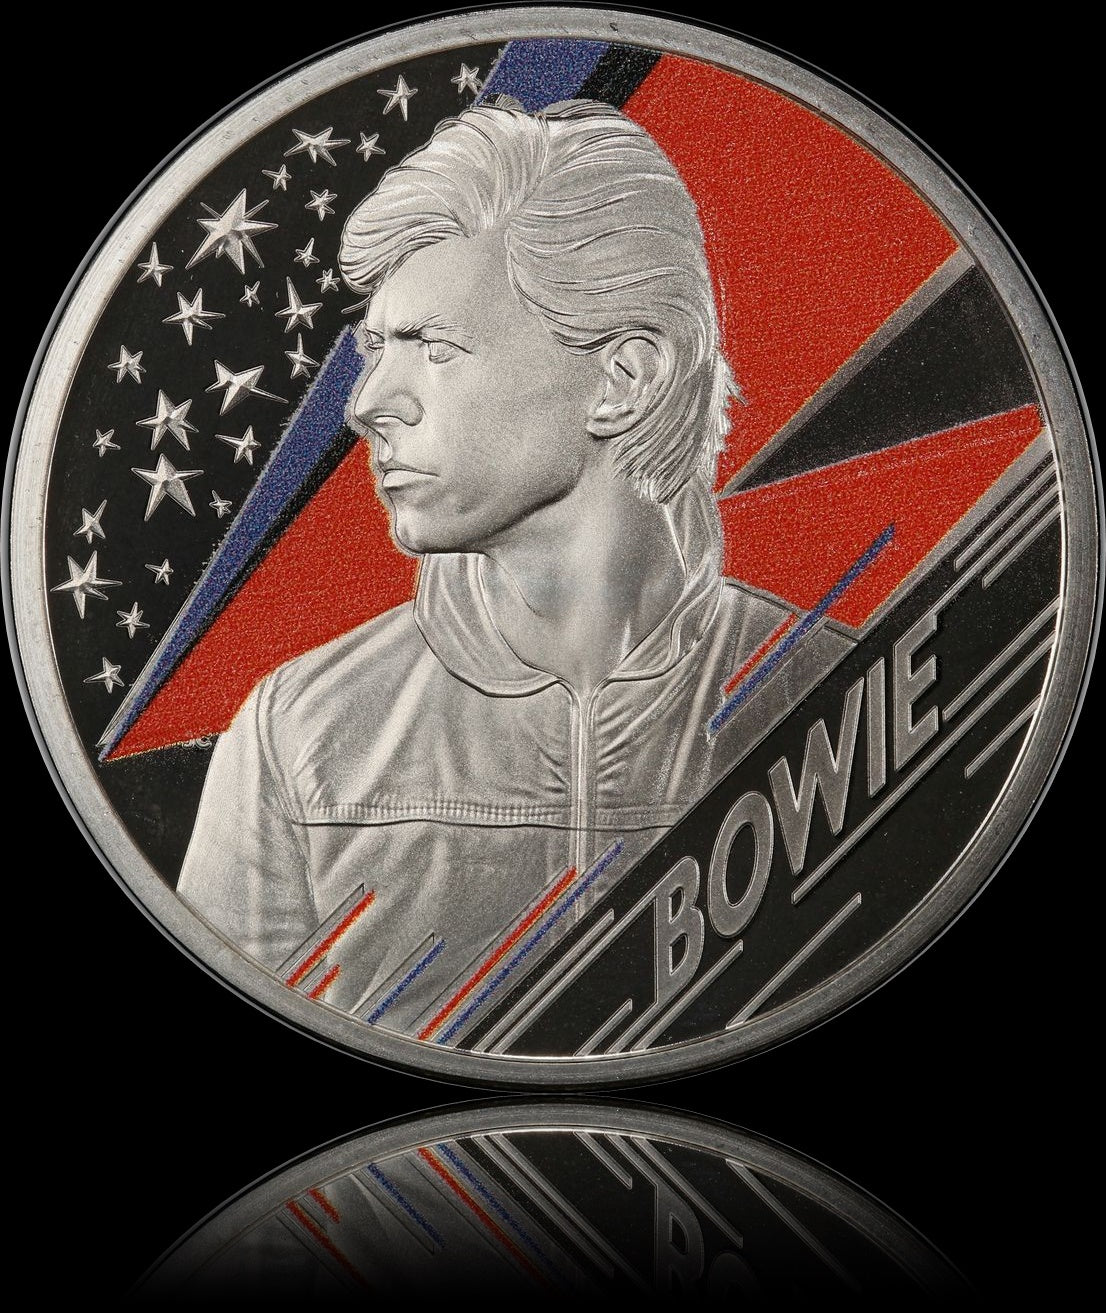 DAVID BOWIE, Music Legends series, 1 oz Silver Proof Colored PF69 Error Coin 2£, 2020